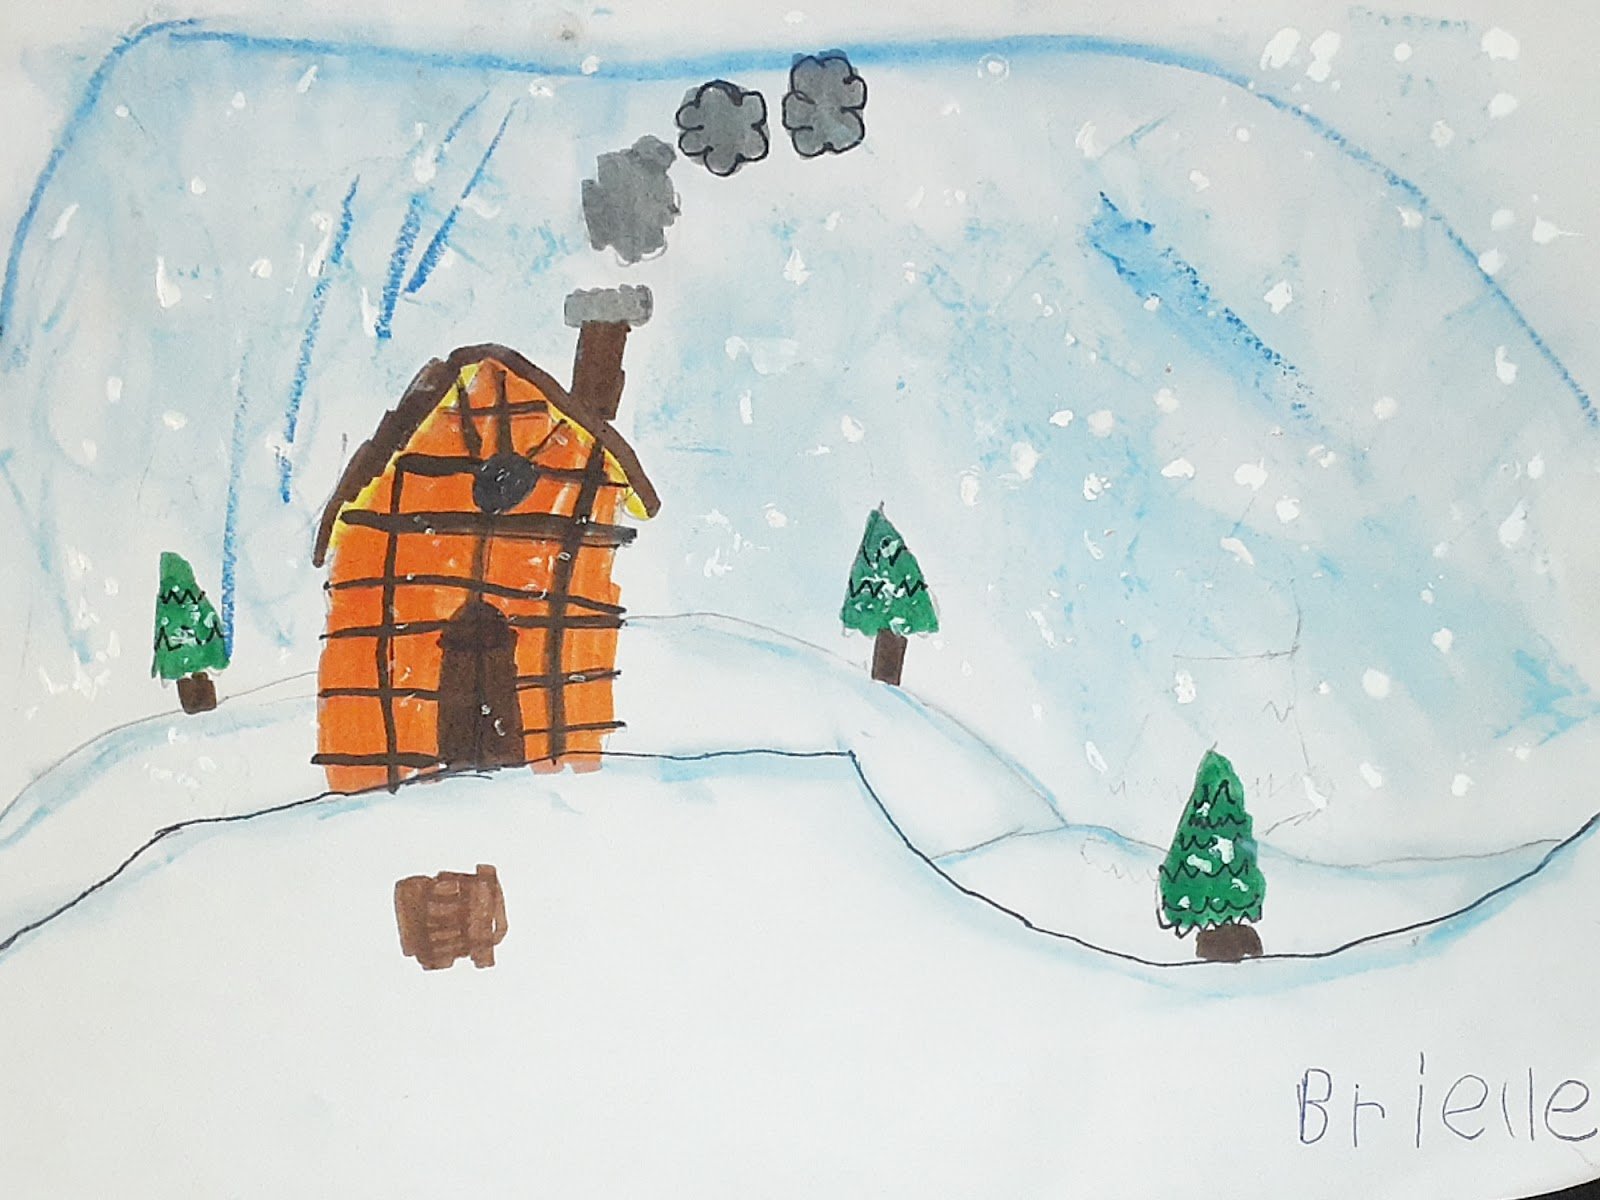 Artwork by Brielle, Age 6 from Fredericton *CONTEST WINNER*